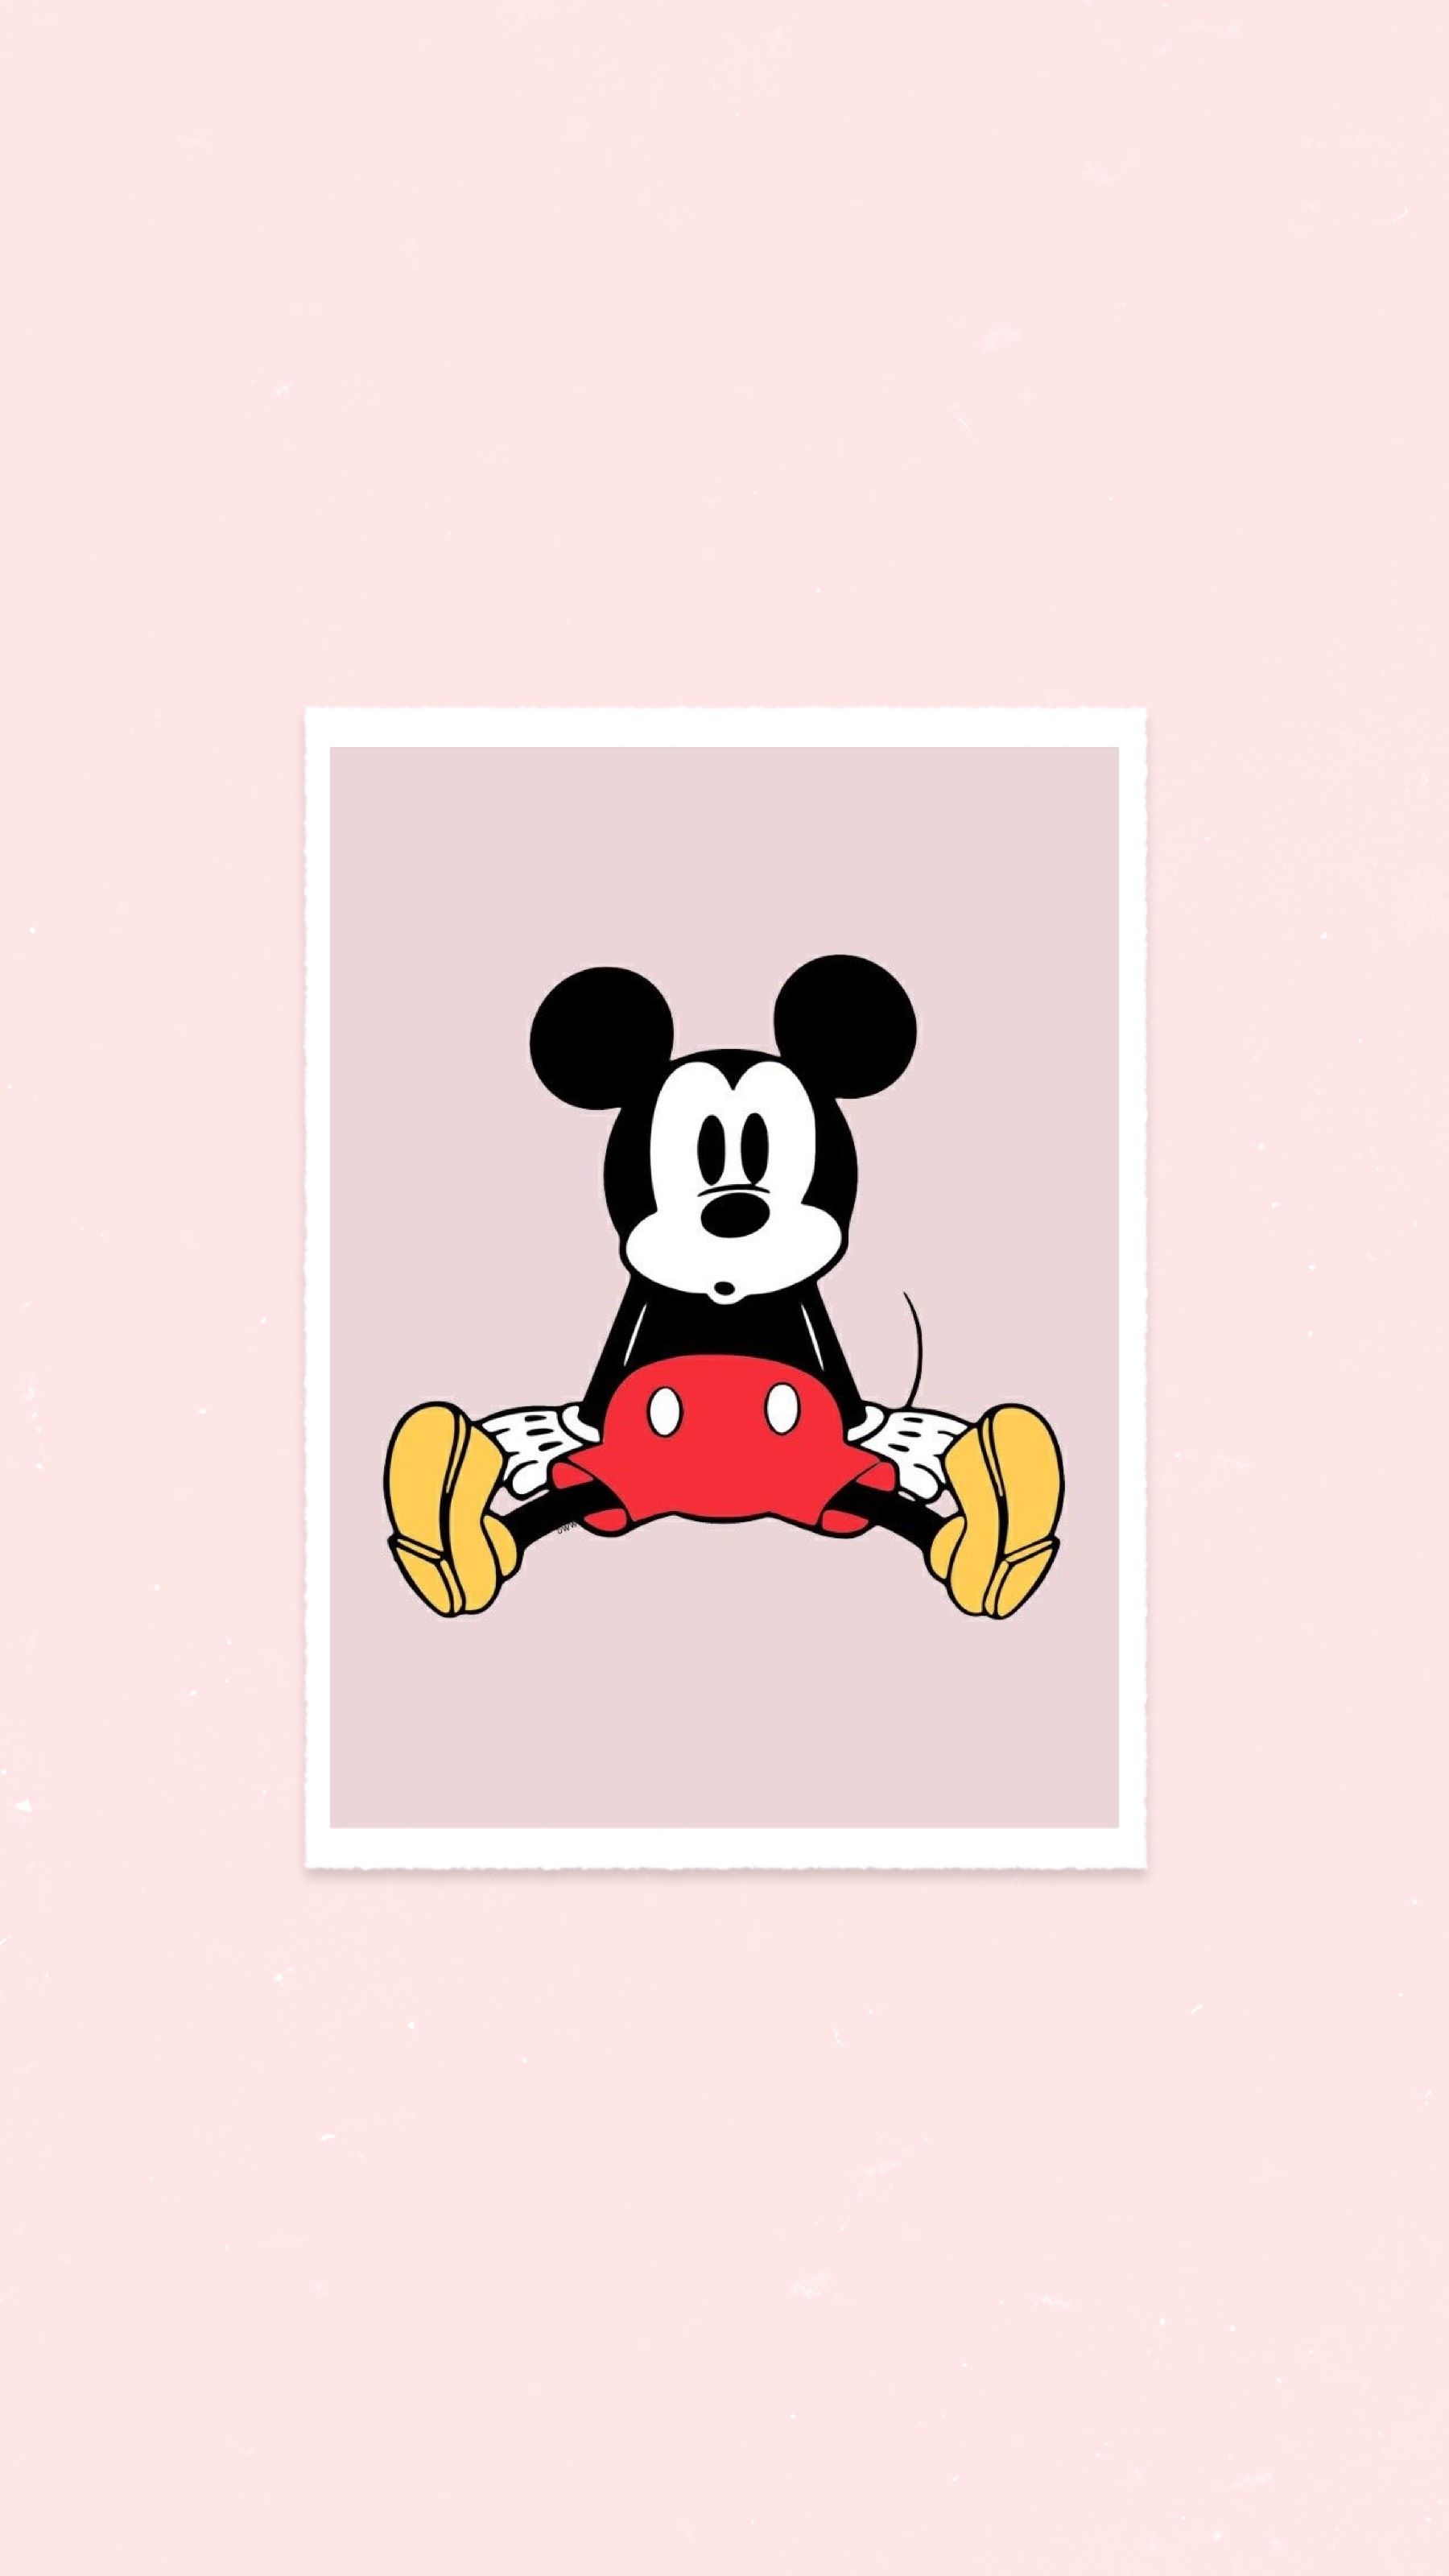 Disney. Mickey mouse wallpaper, Mickey mouse drawings, Mickey mouse picture